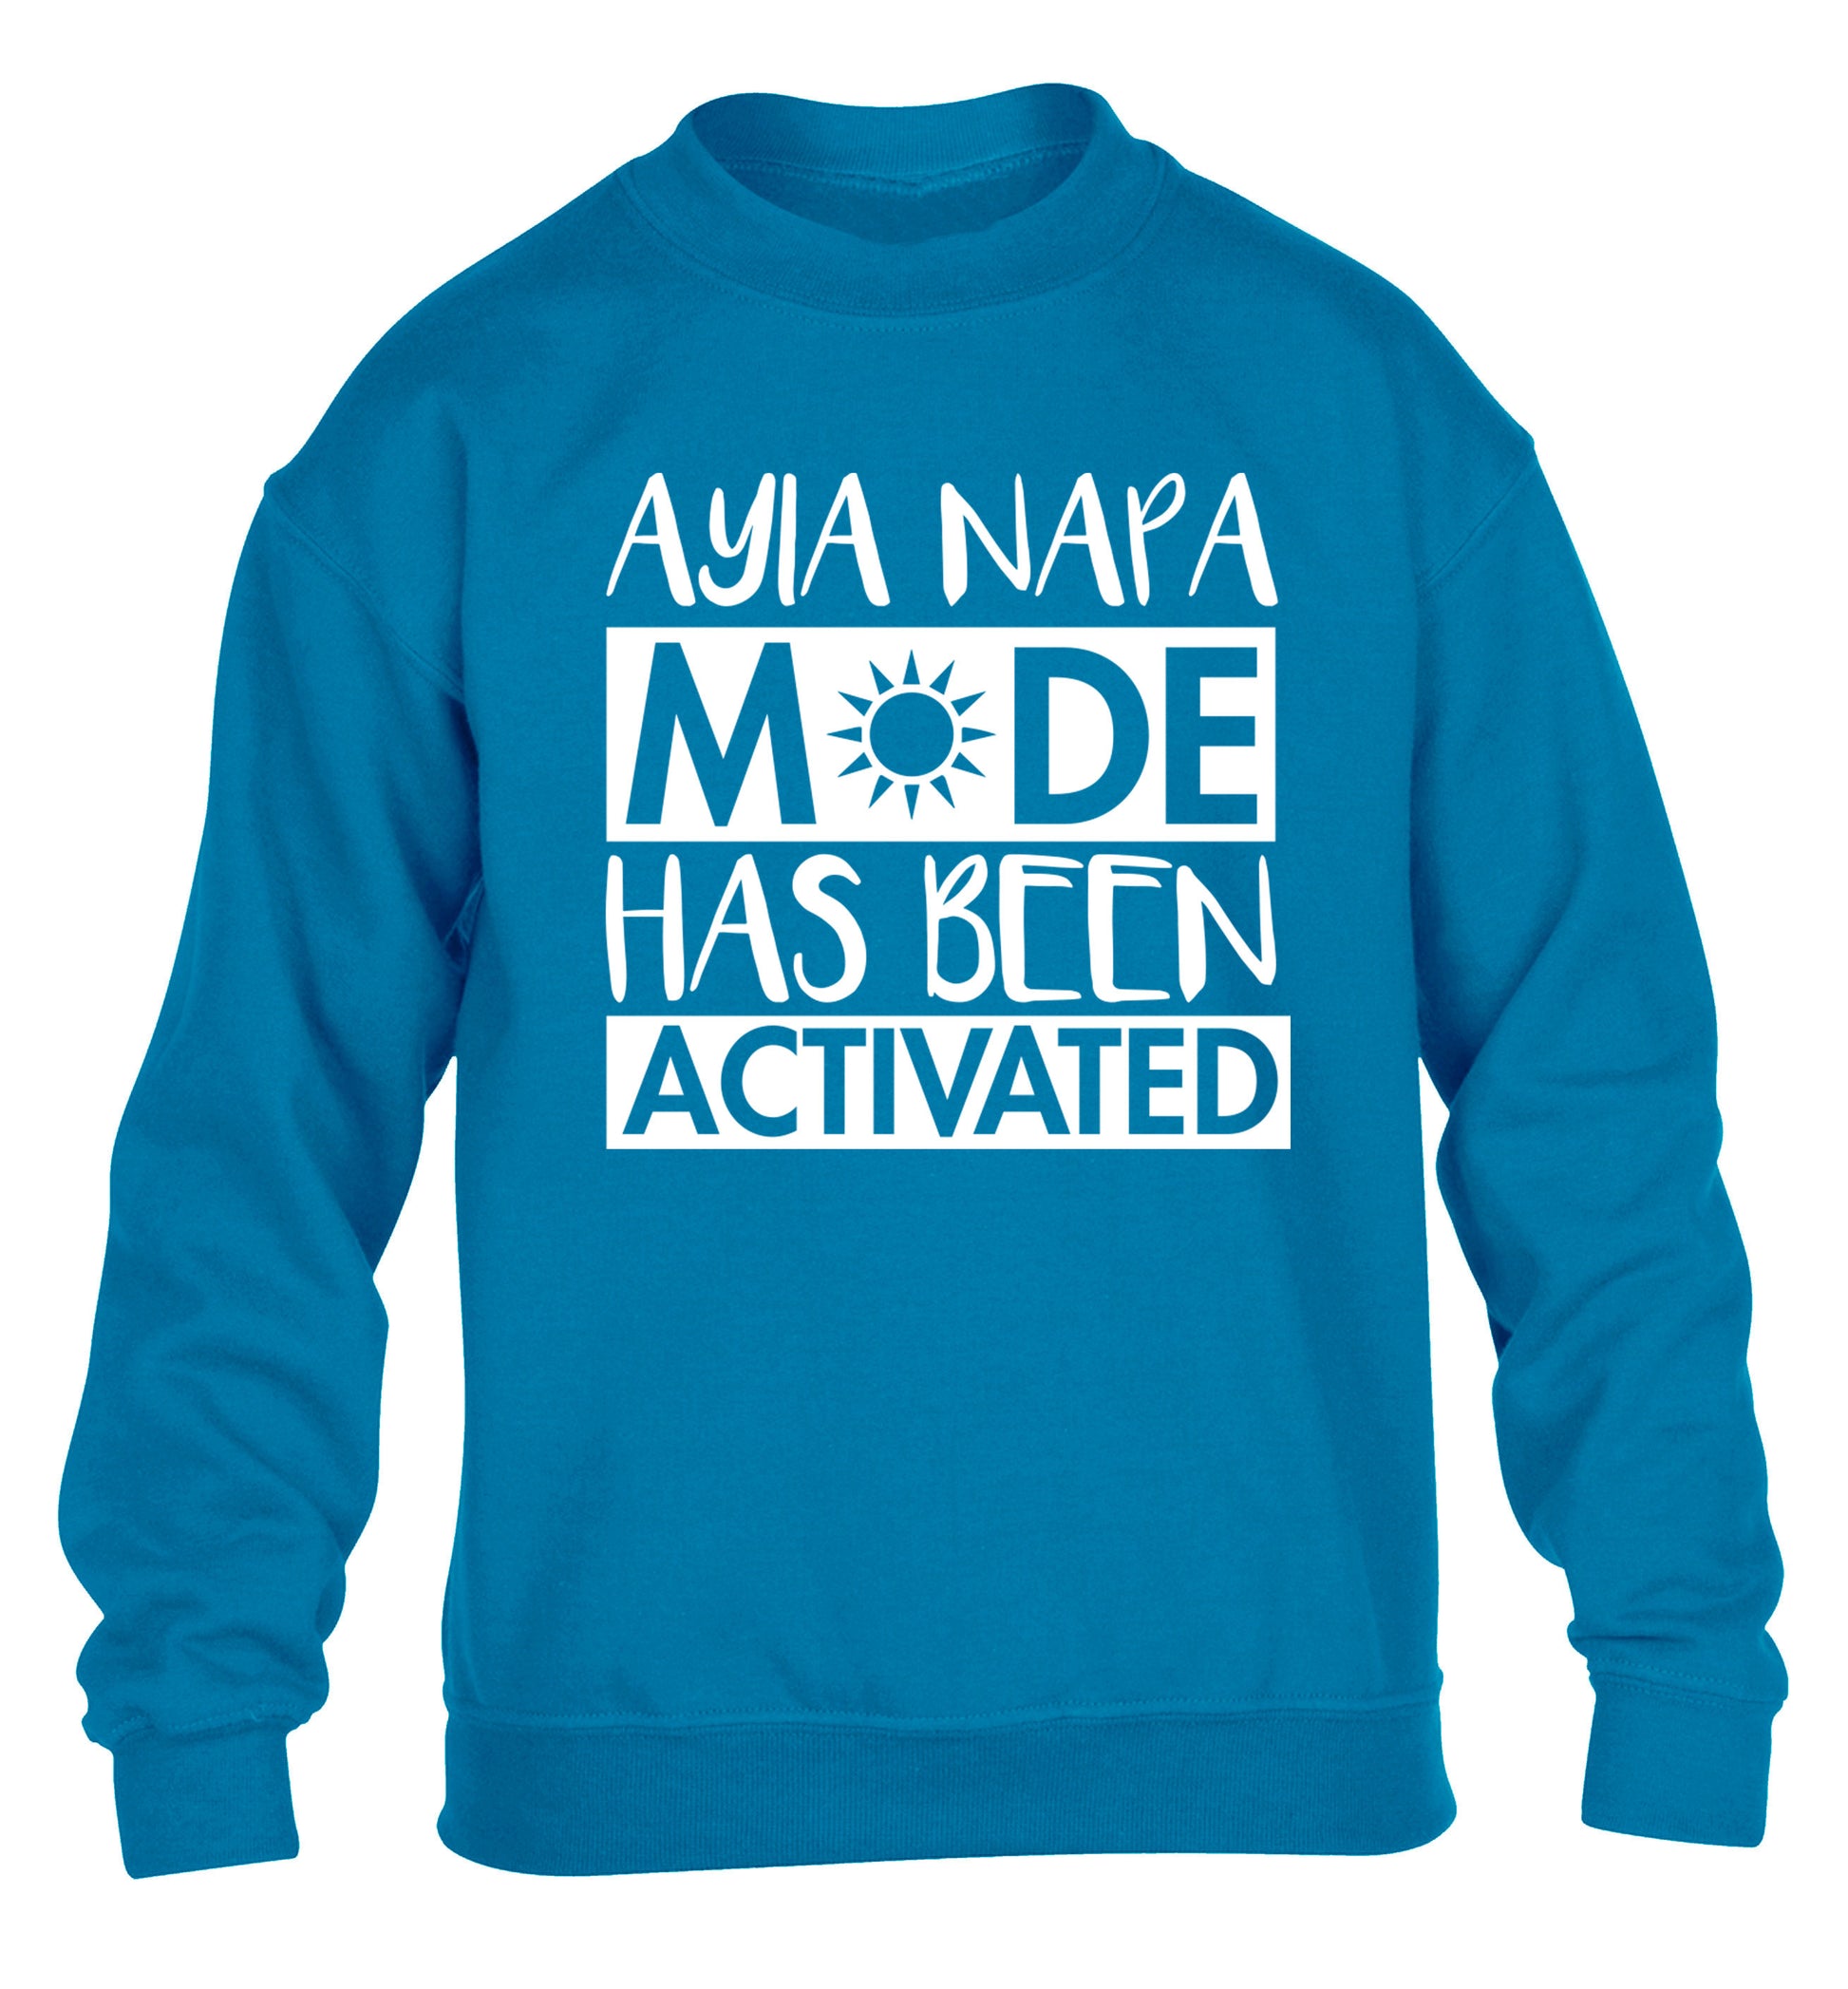 Aiya Napa mode has been activated children's blue sweater 12-14 Years